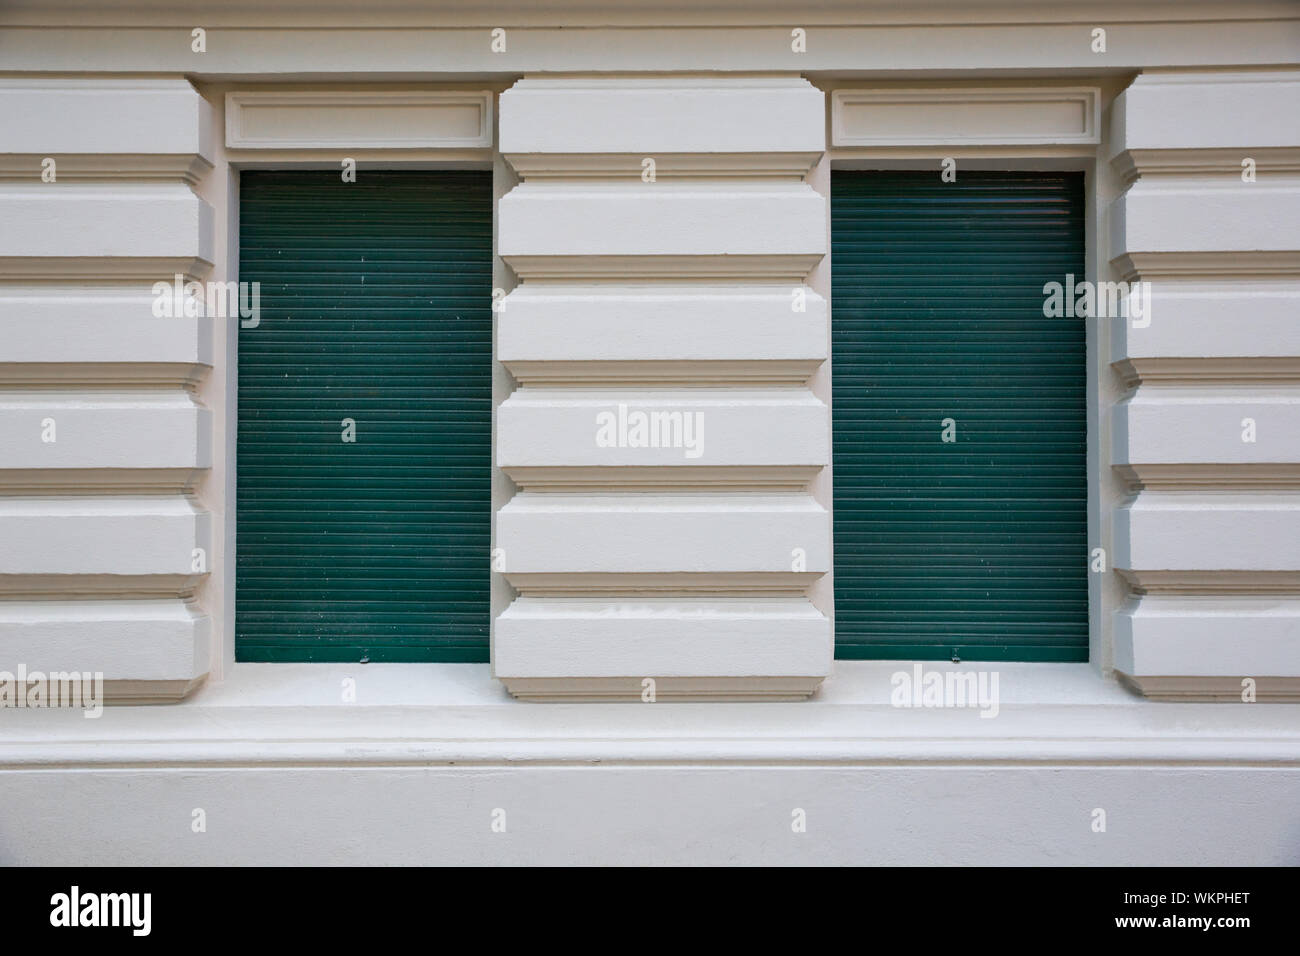 Closed Green Shutters Of House Windows Stock Photo